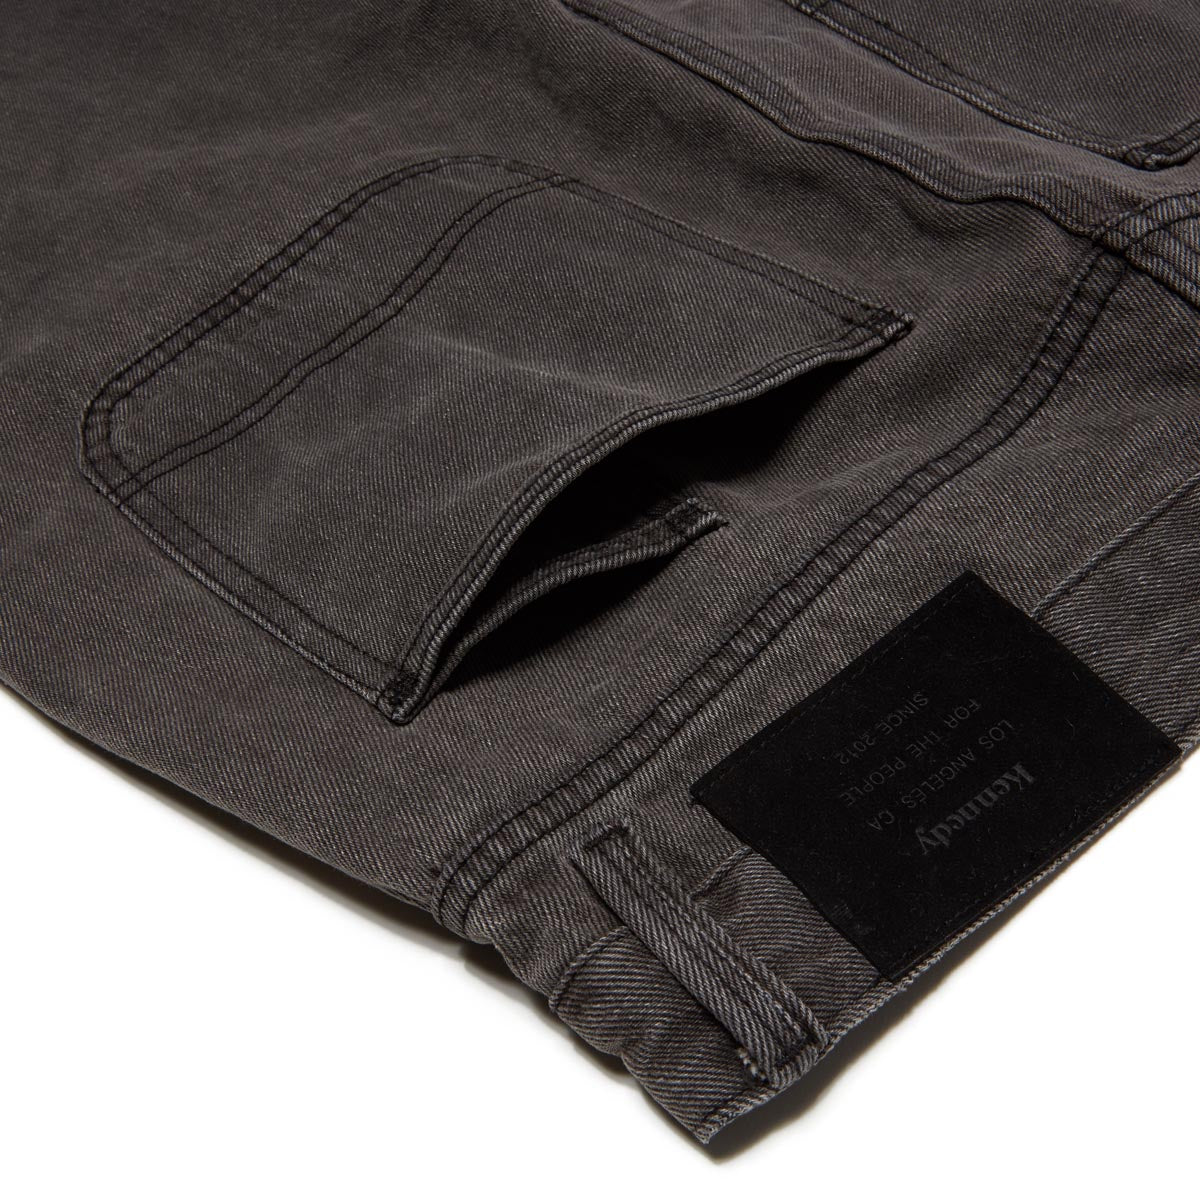 Kennedy The Wide Tapered Jeans - Black Flag image 5